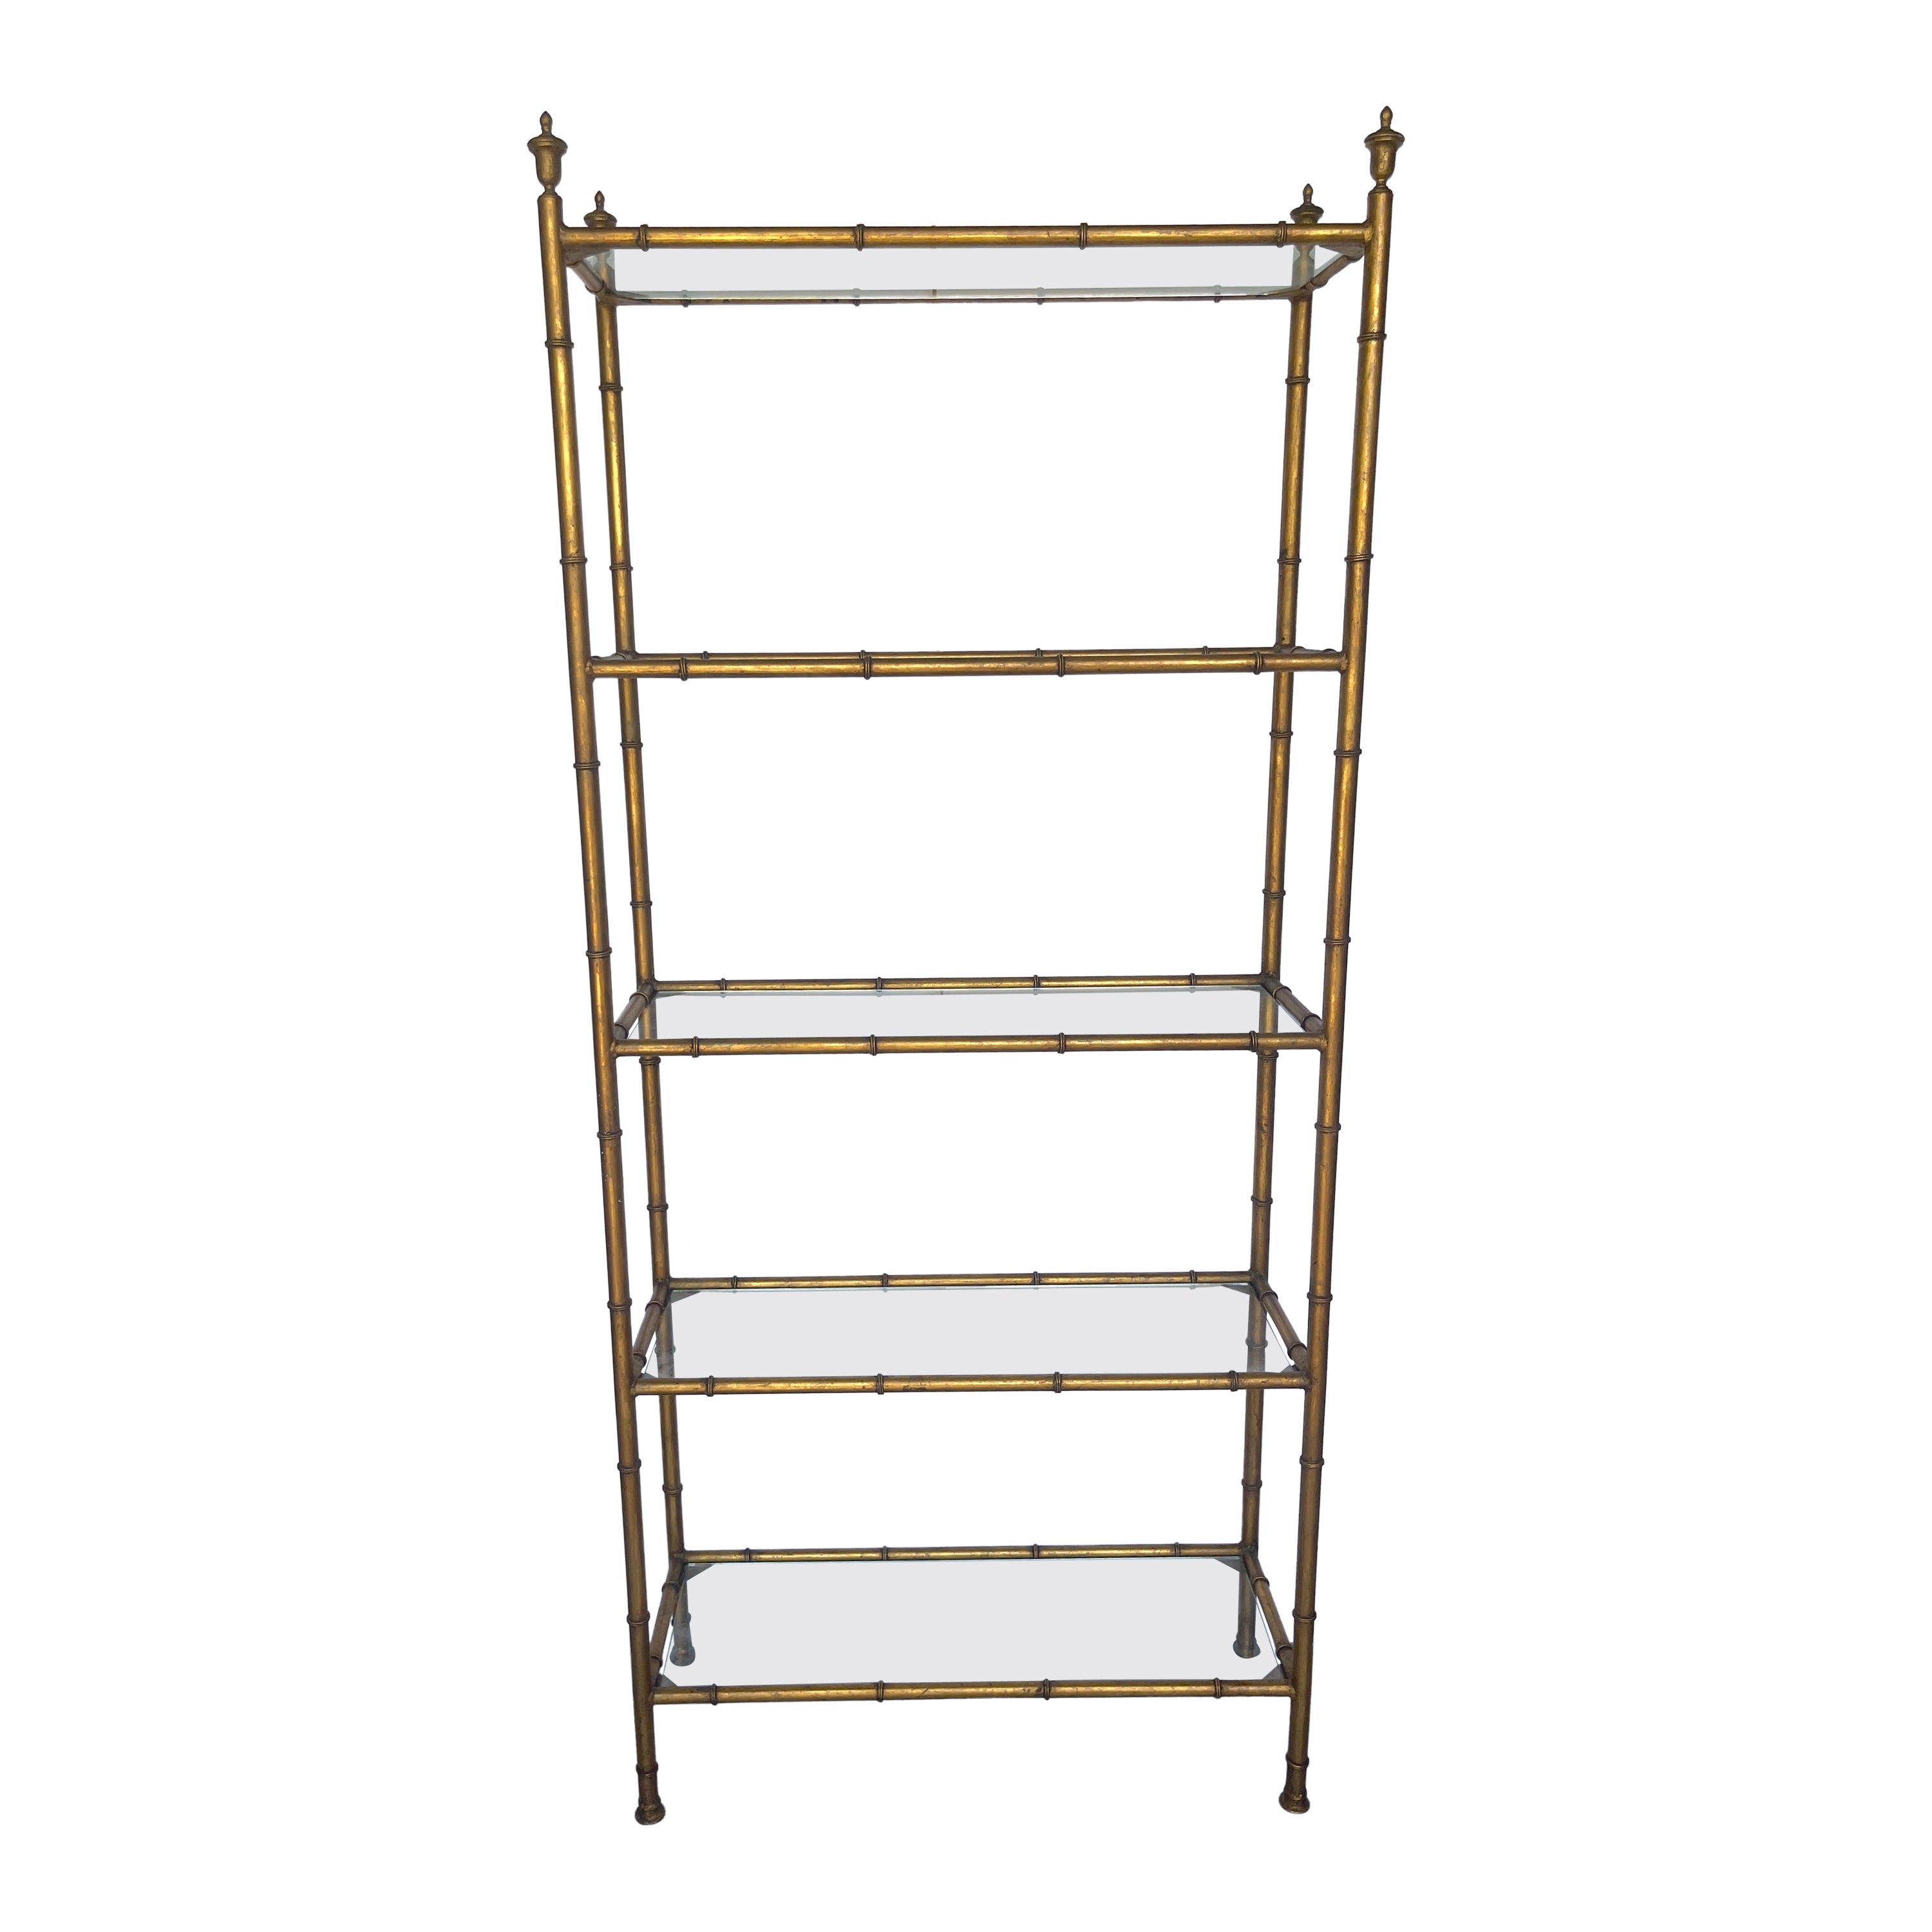 Italian Neoclassical Gilt Faux Bamboo 5-Tier Etagere with Urn Finials, C. 1960s For Sale